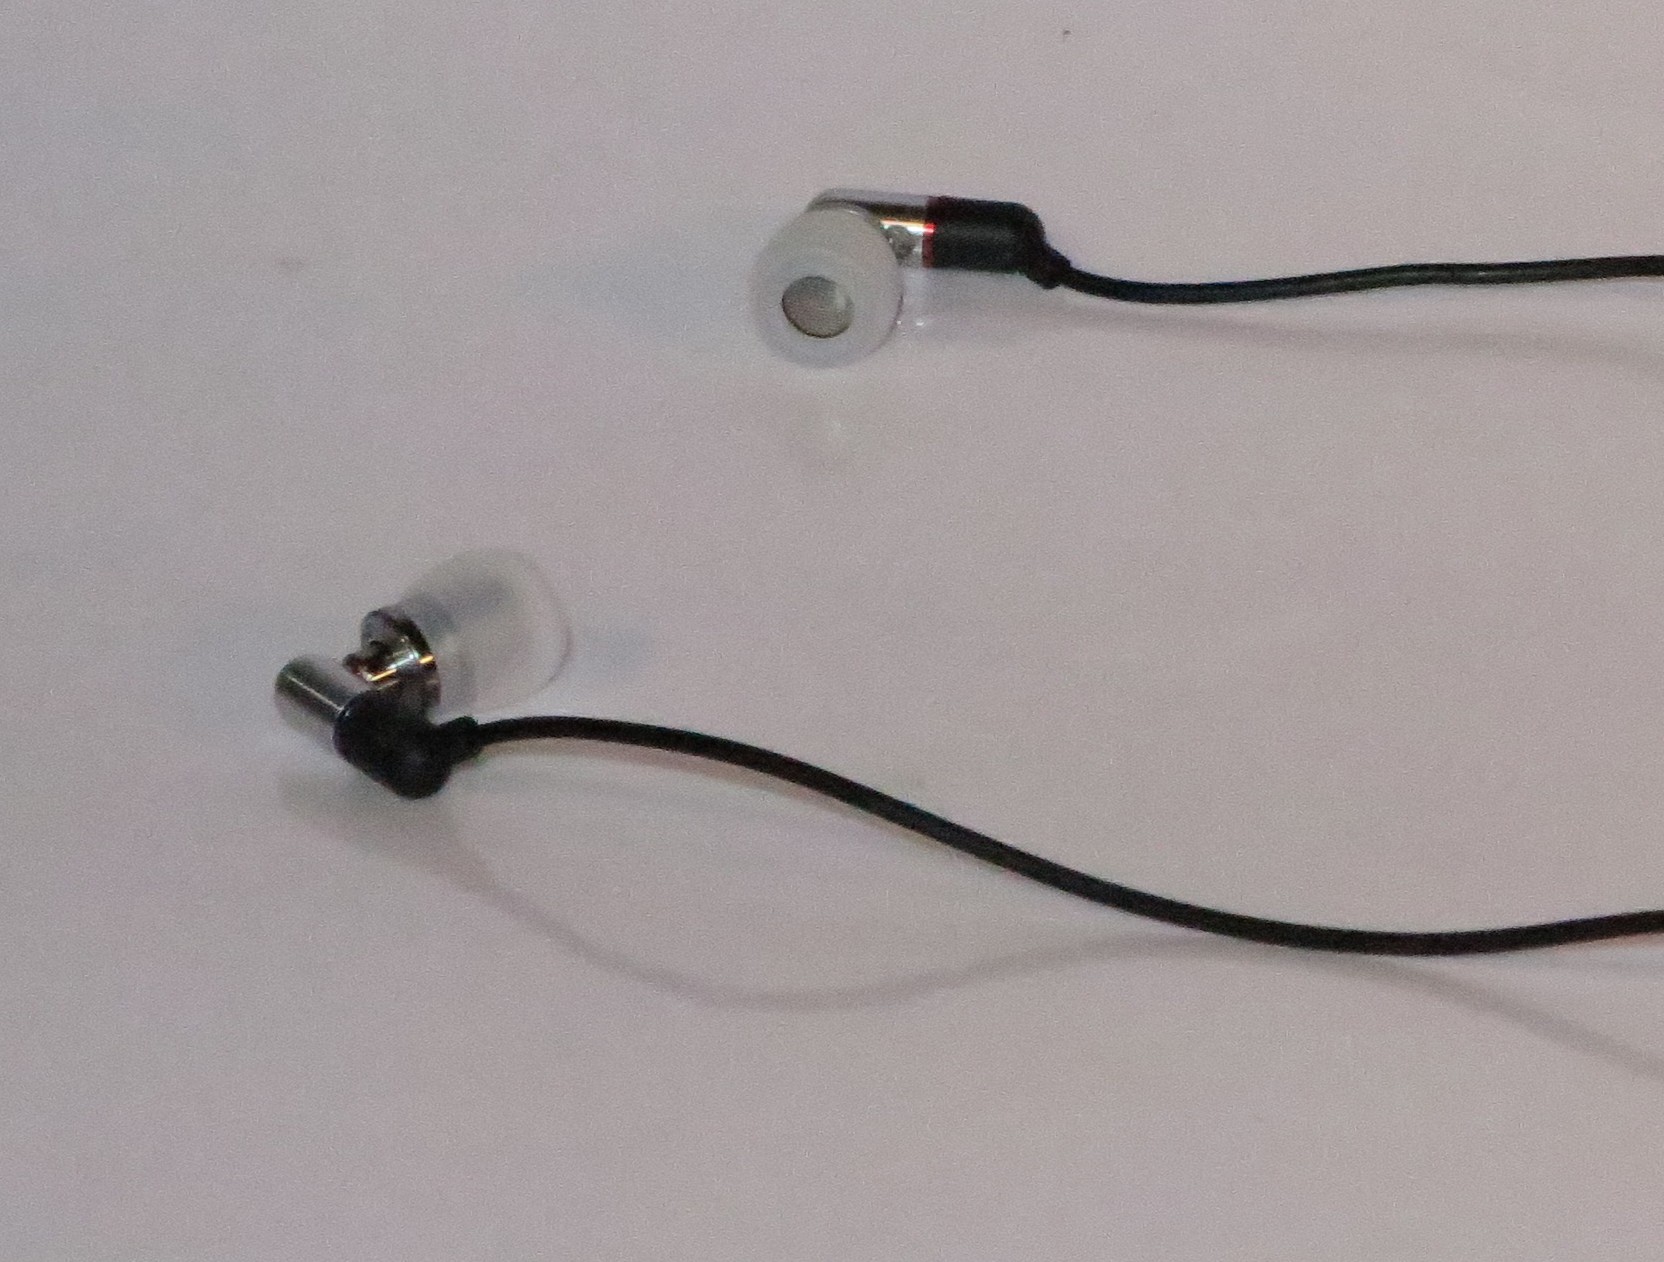 Product Review–Creative Labs MA930 in-ear smartphone headset